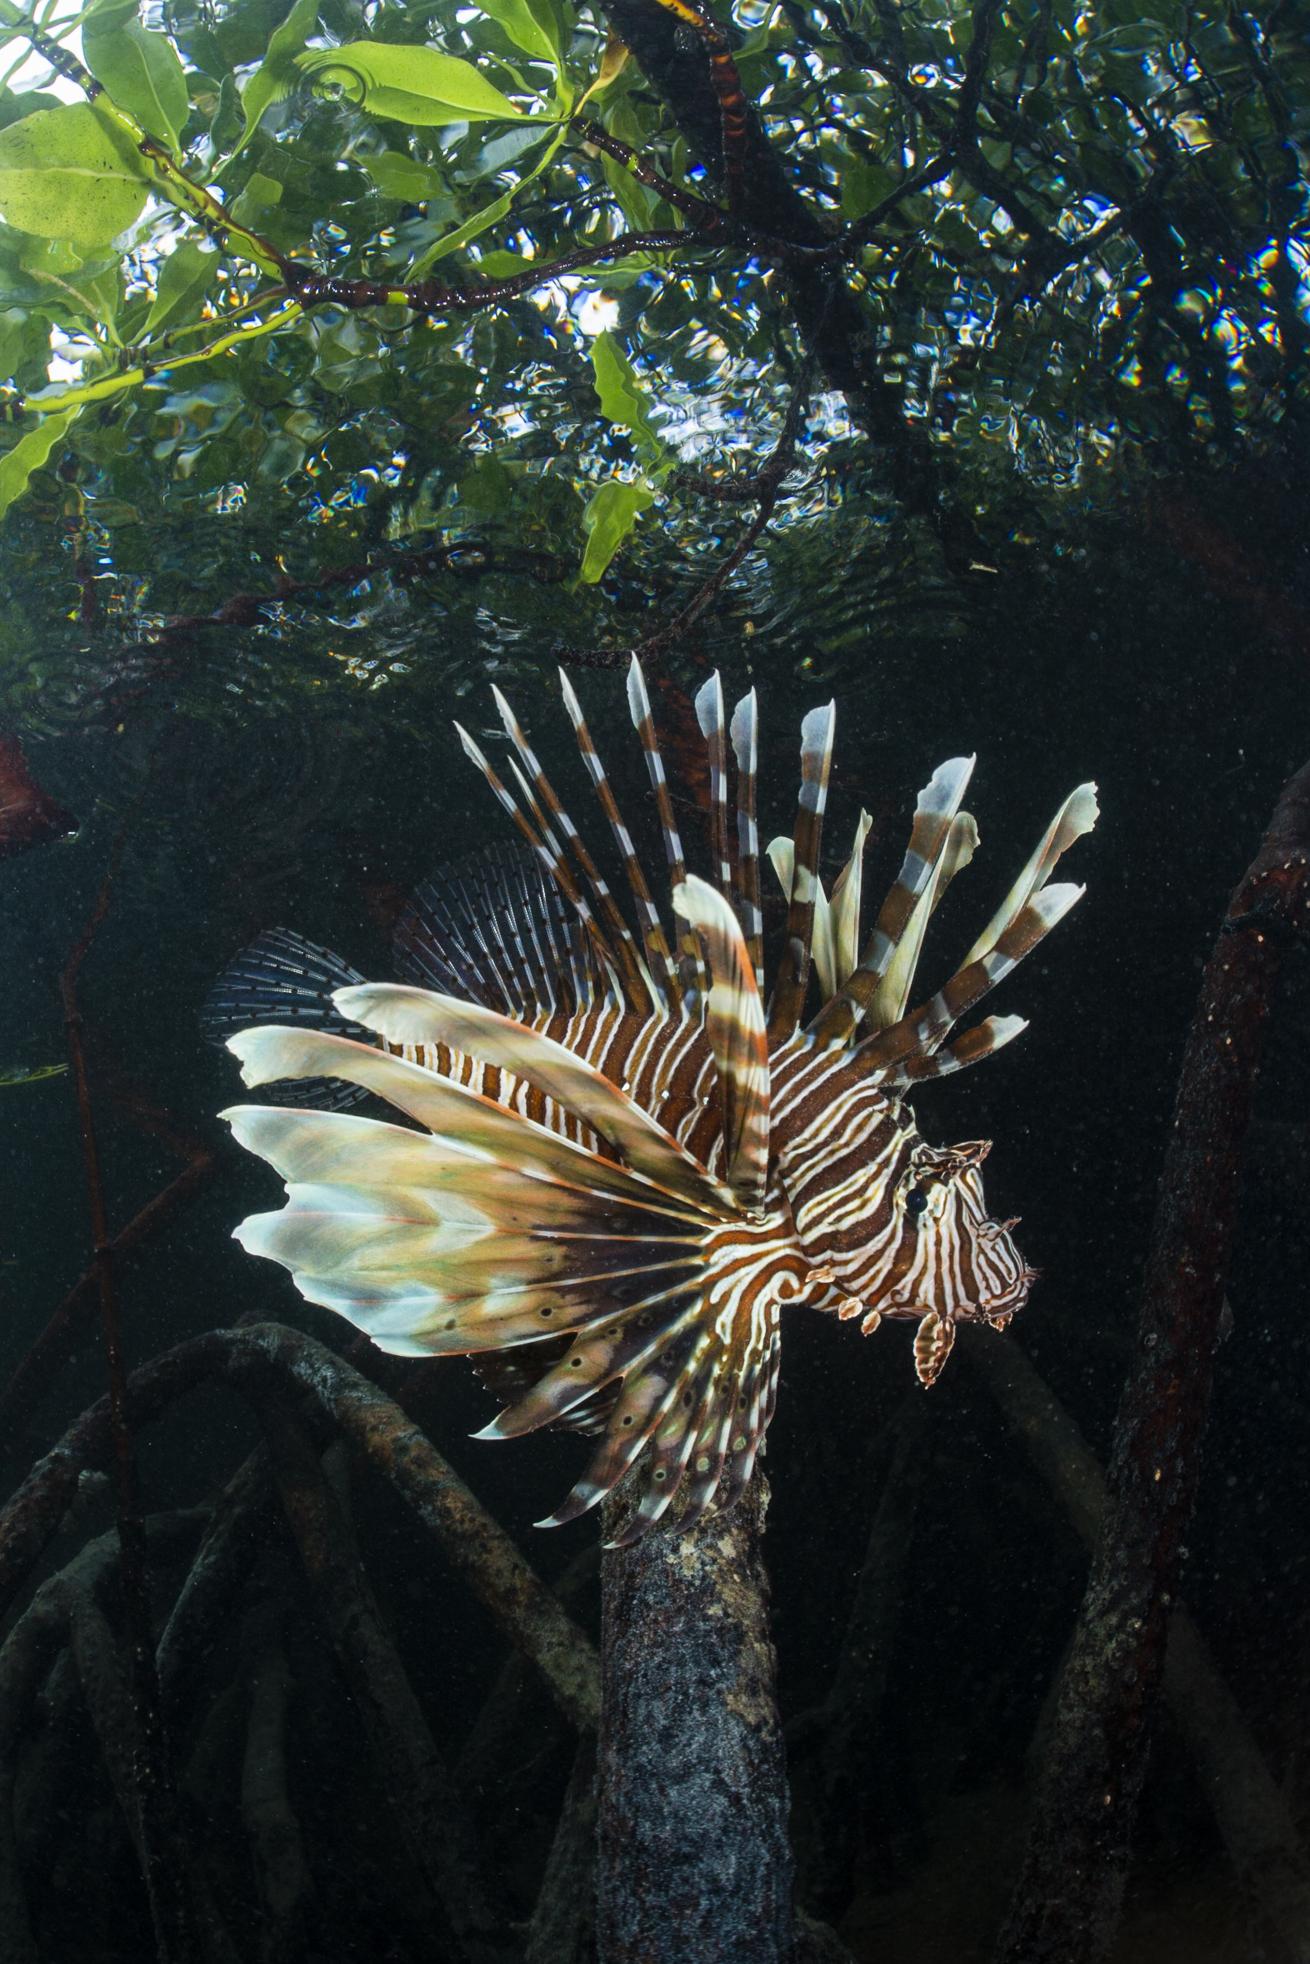 Mangrove lionfish - lionfish makes its way through tangled roots of a dense mangrove system to hunt juvenile fish in Mauritius.